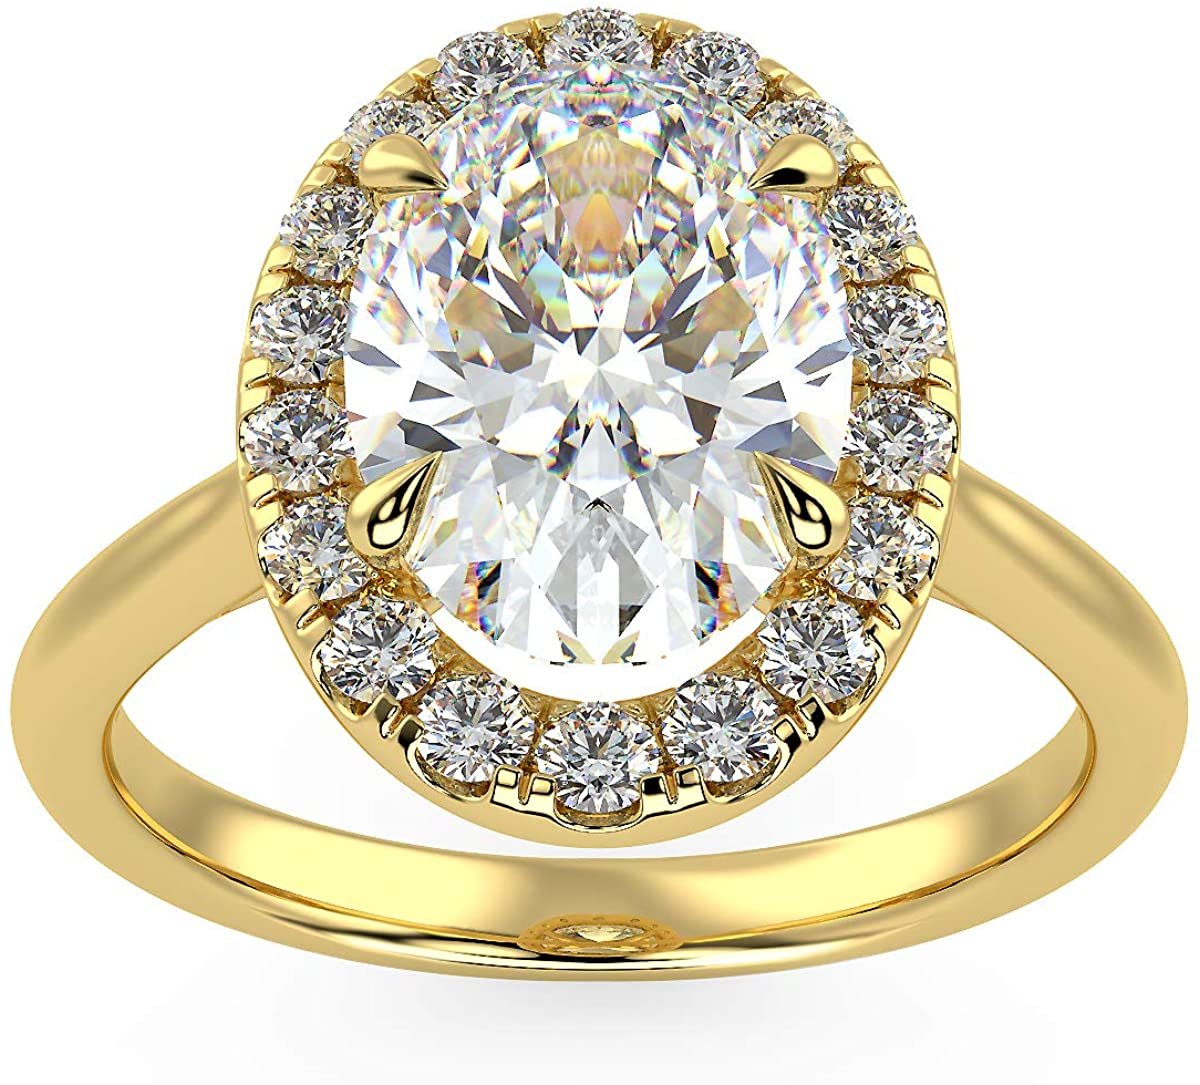 IGI Certified 14K Yellow Gold 1-3/4 Carat Oval Lab Created Diamond Vintage-Inspired Halo Engagement Ring (G-H Color, VS1-VS2 Clarity, 1.5 Carat Center Stone) - Size 8